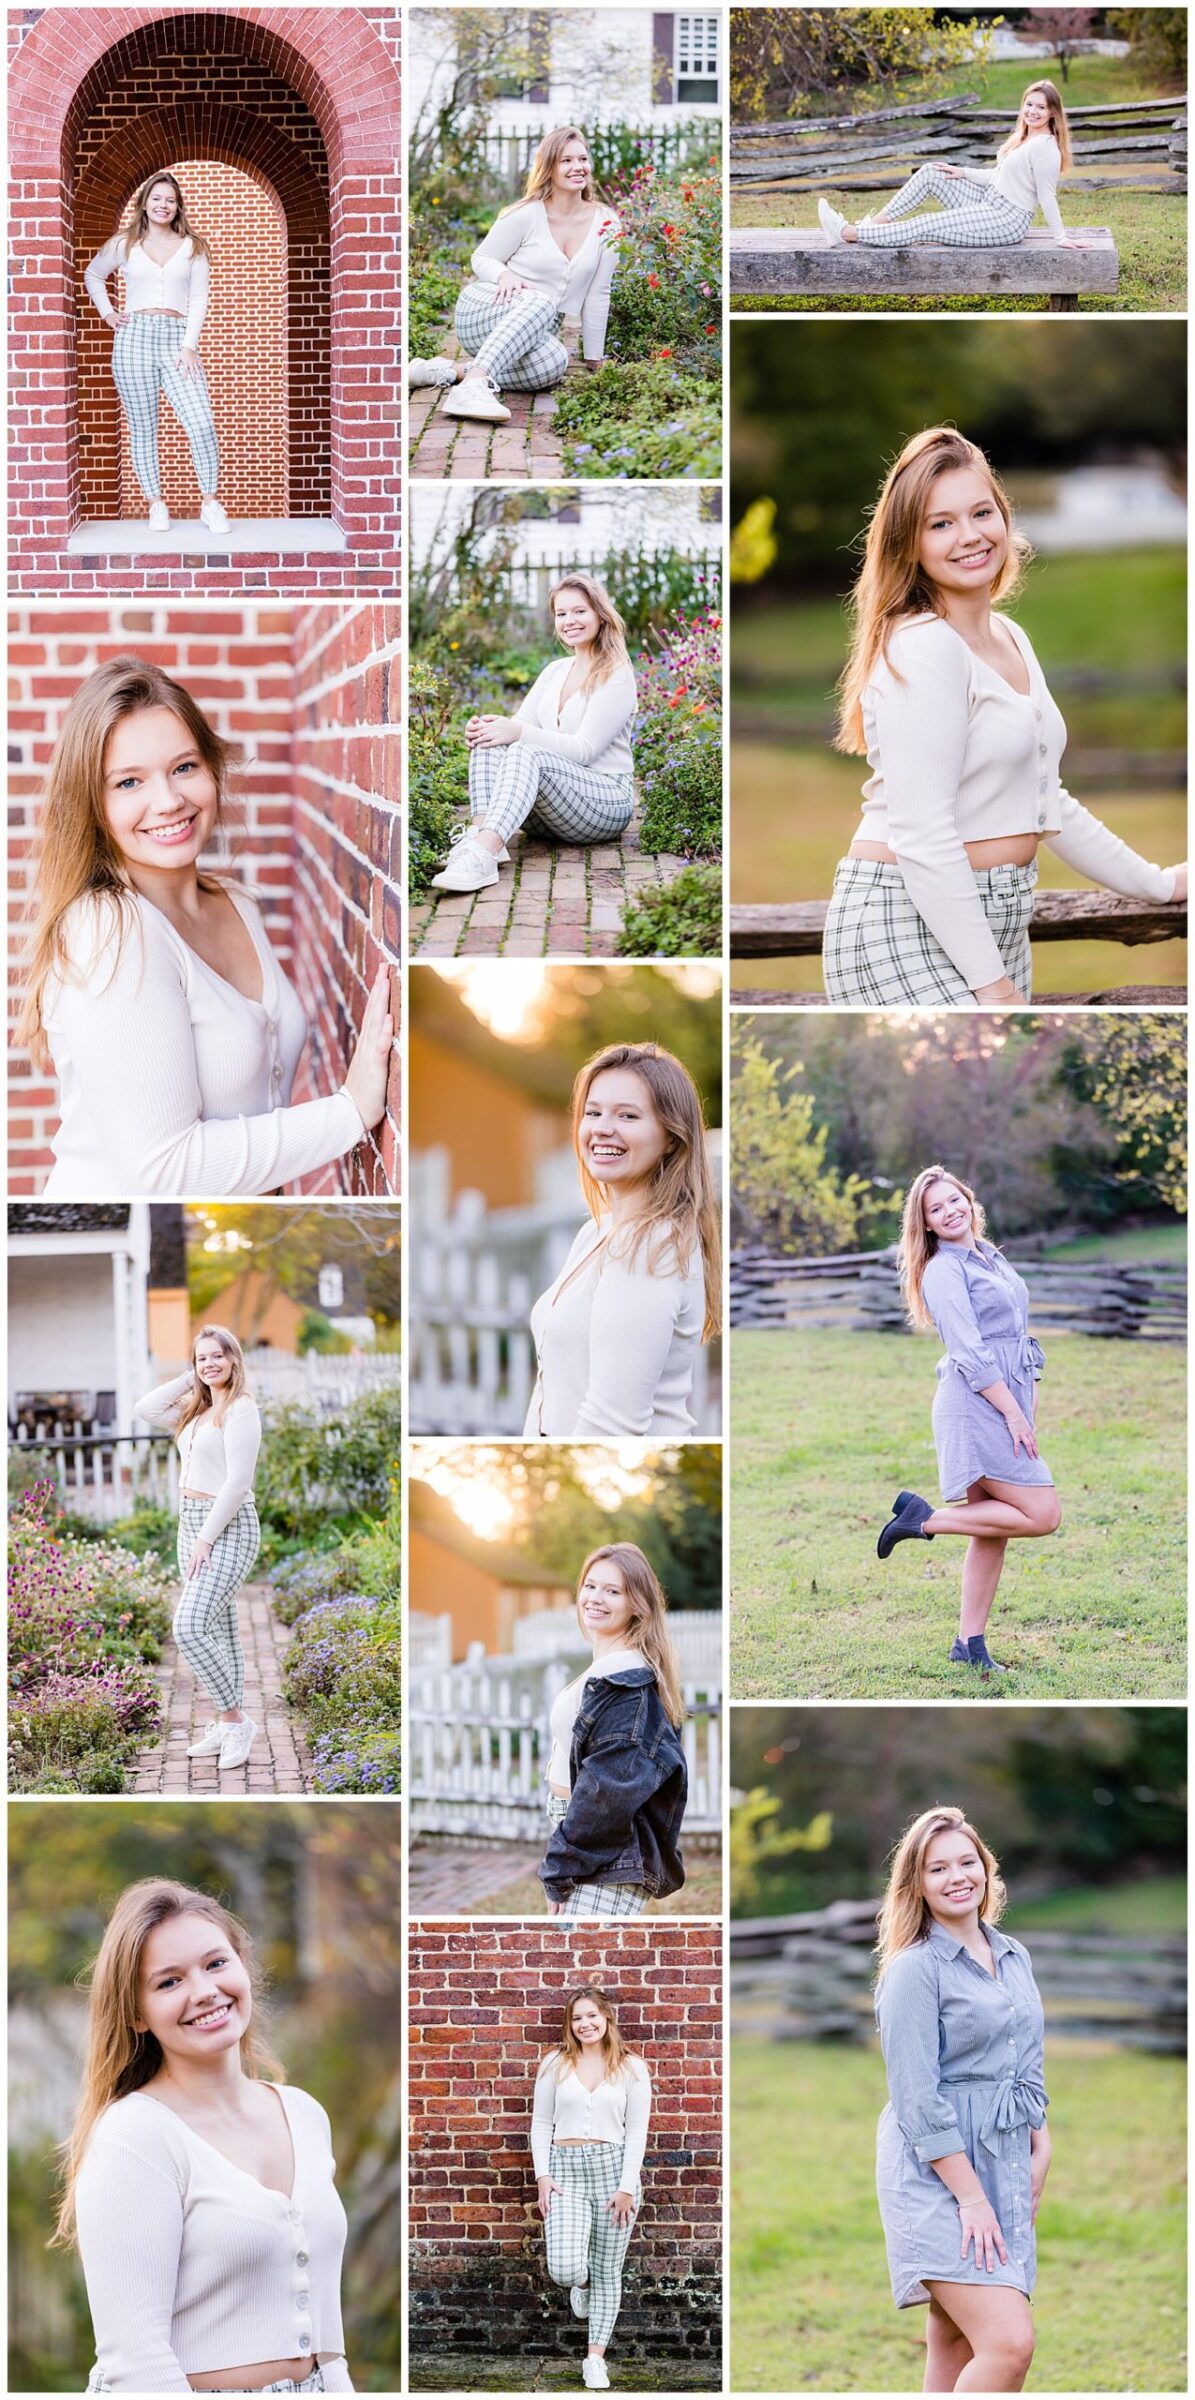 Collage of images of a gorgeous girl showing where to do senior photos in Williamsburg, VA